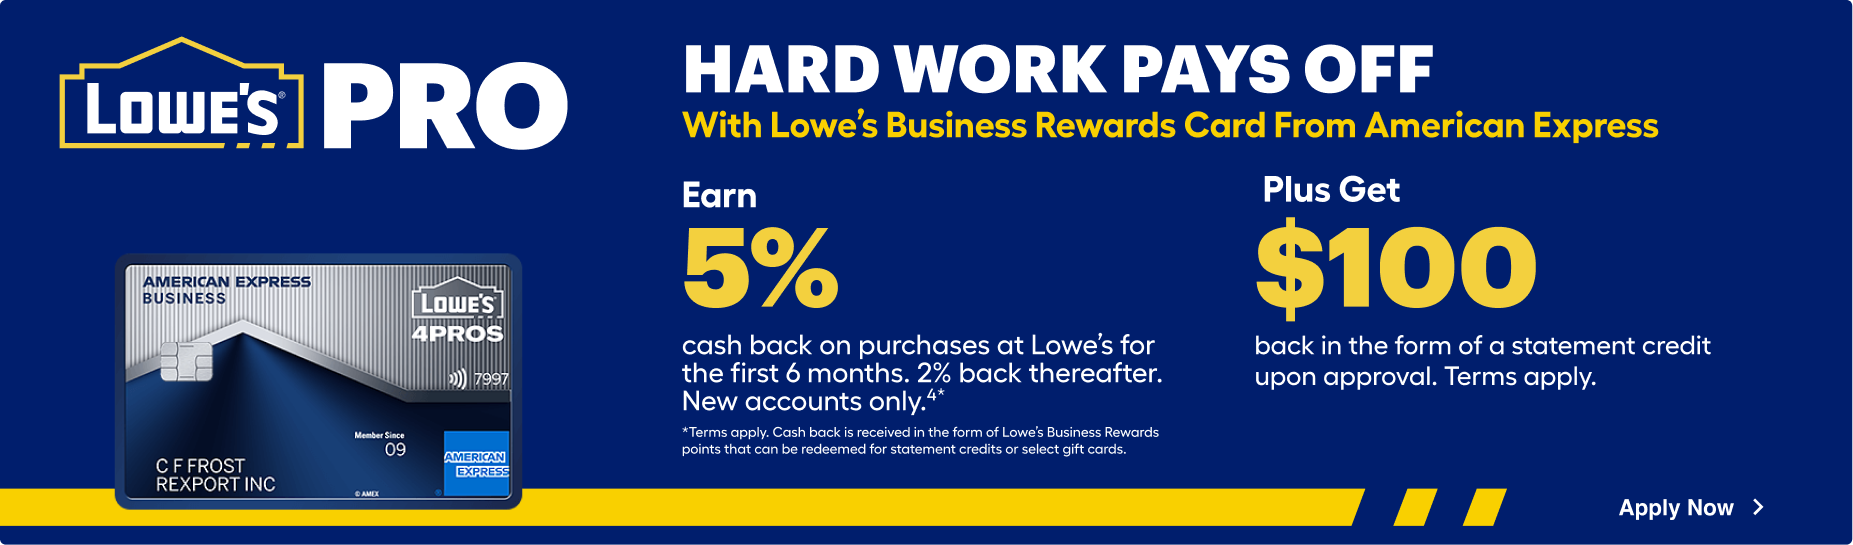 Can Lowes Amex card be used anywhere? Leia aqui: Can a Lowes American ...